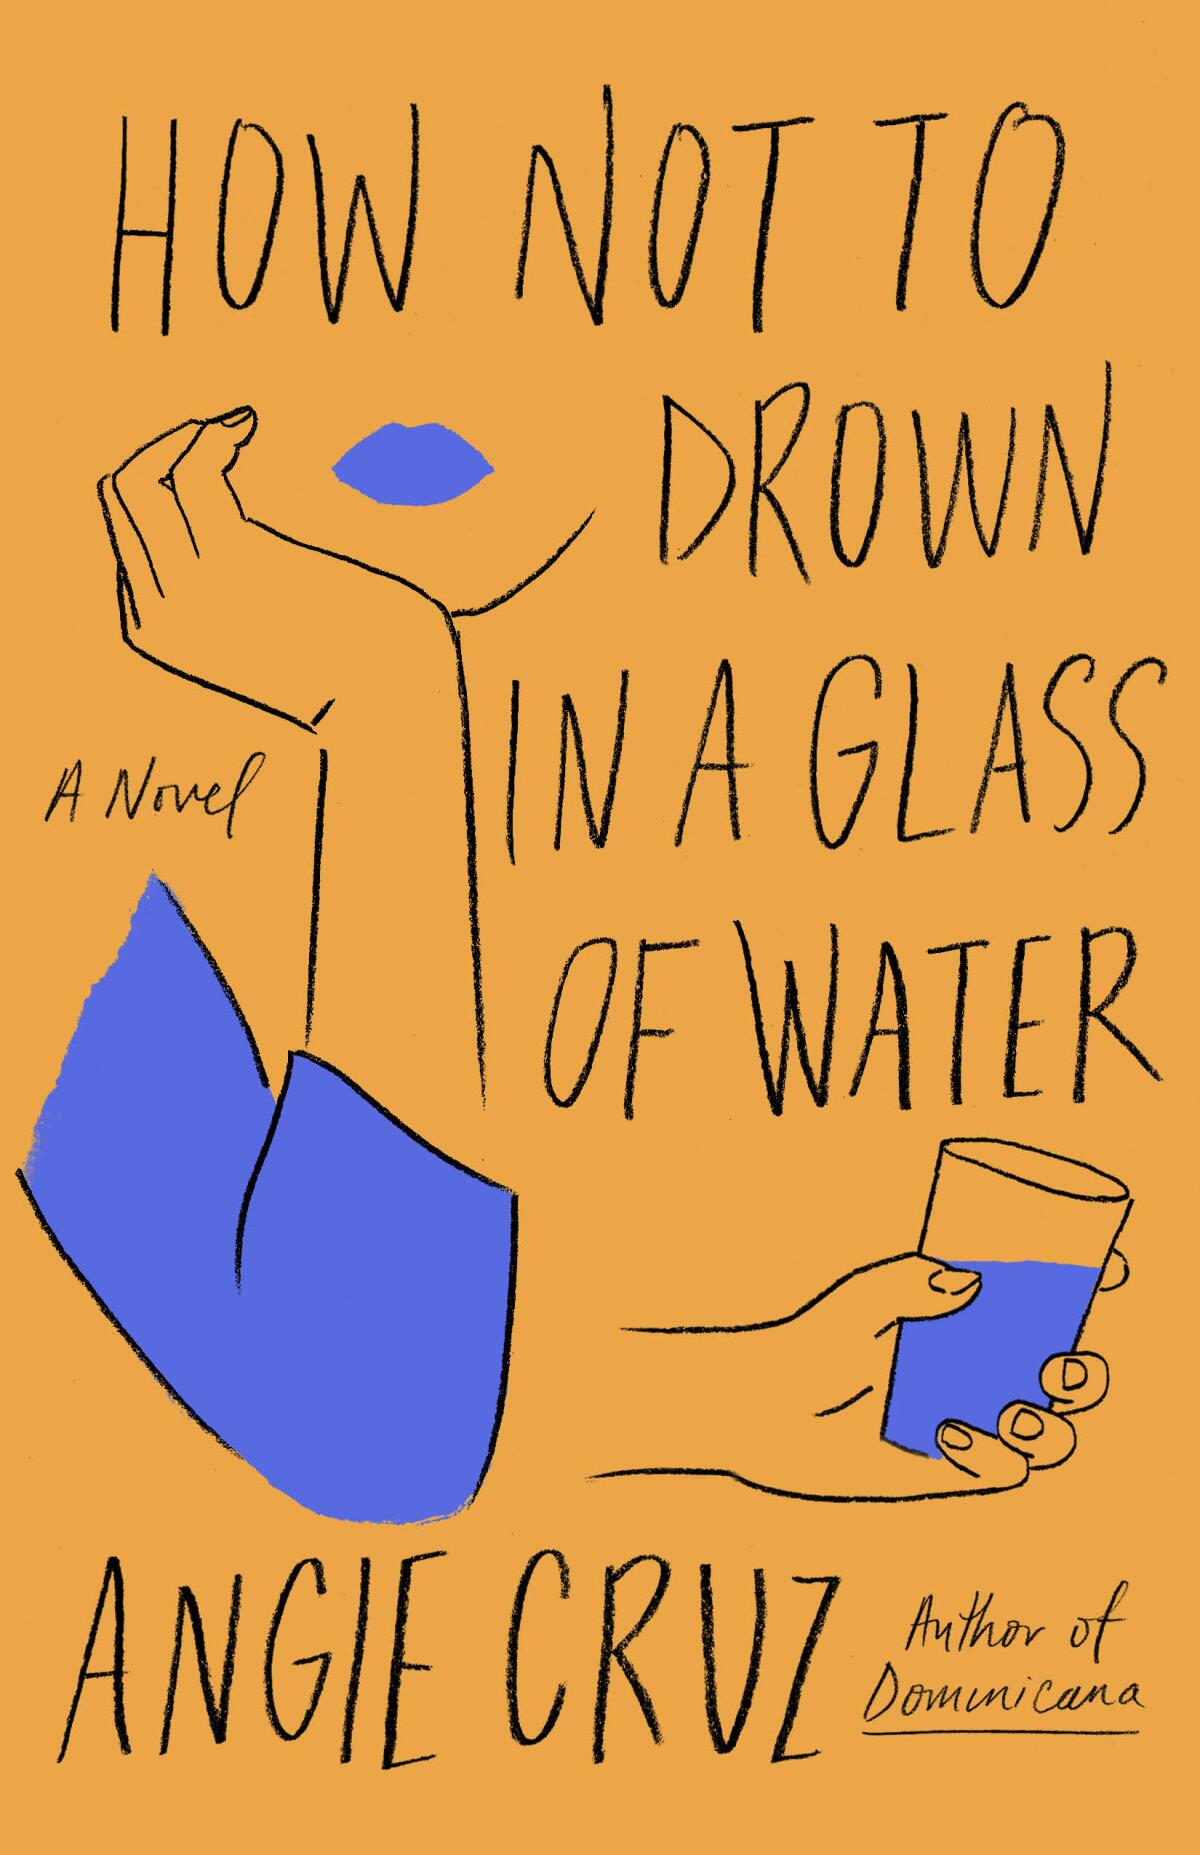 "How Not to Drown in a Glass of Water" by Angie Cruz